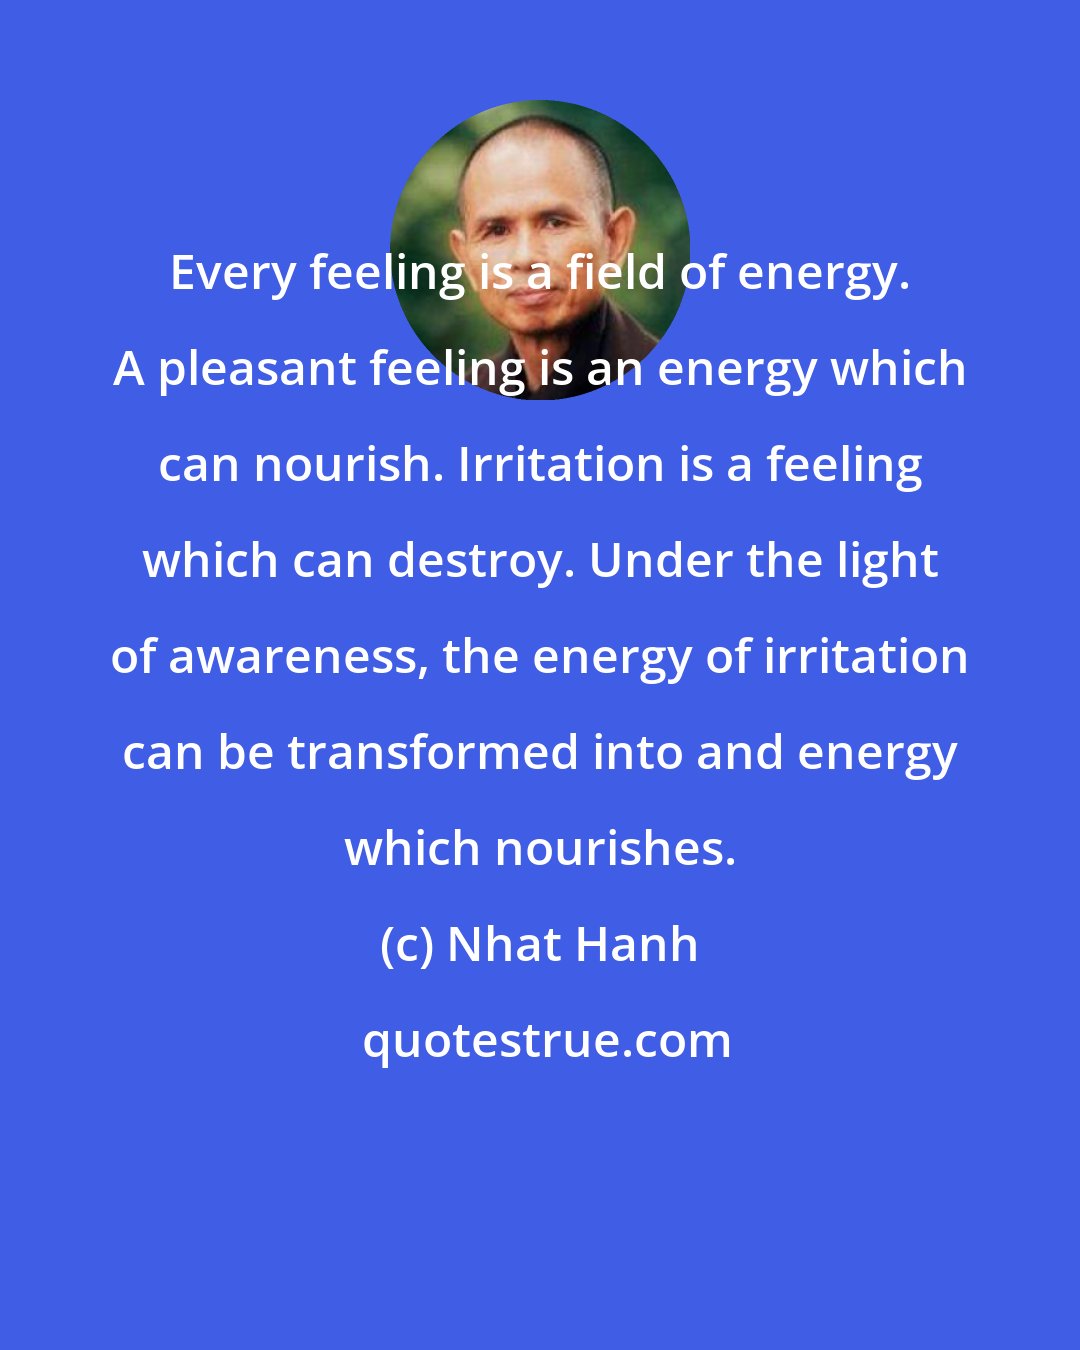 Nhat Hanh: Every feeling is a field of energy. A pleasant feeling is an energy which can nourish. Irritation is a feeling which can destroy. Under the light of awareness, the energy of irritation can be transformed into and energy which nourishes.